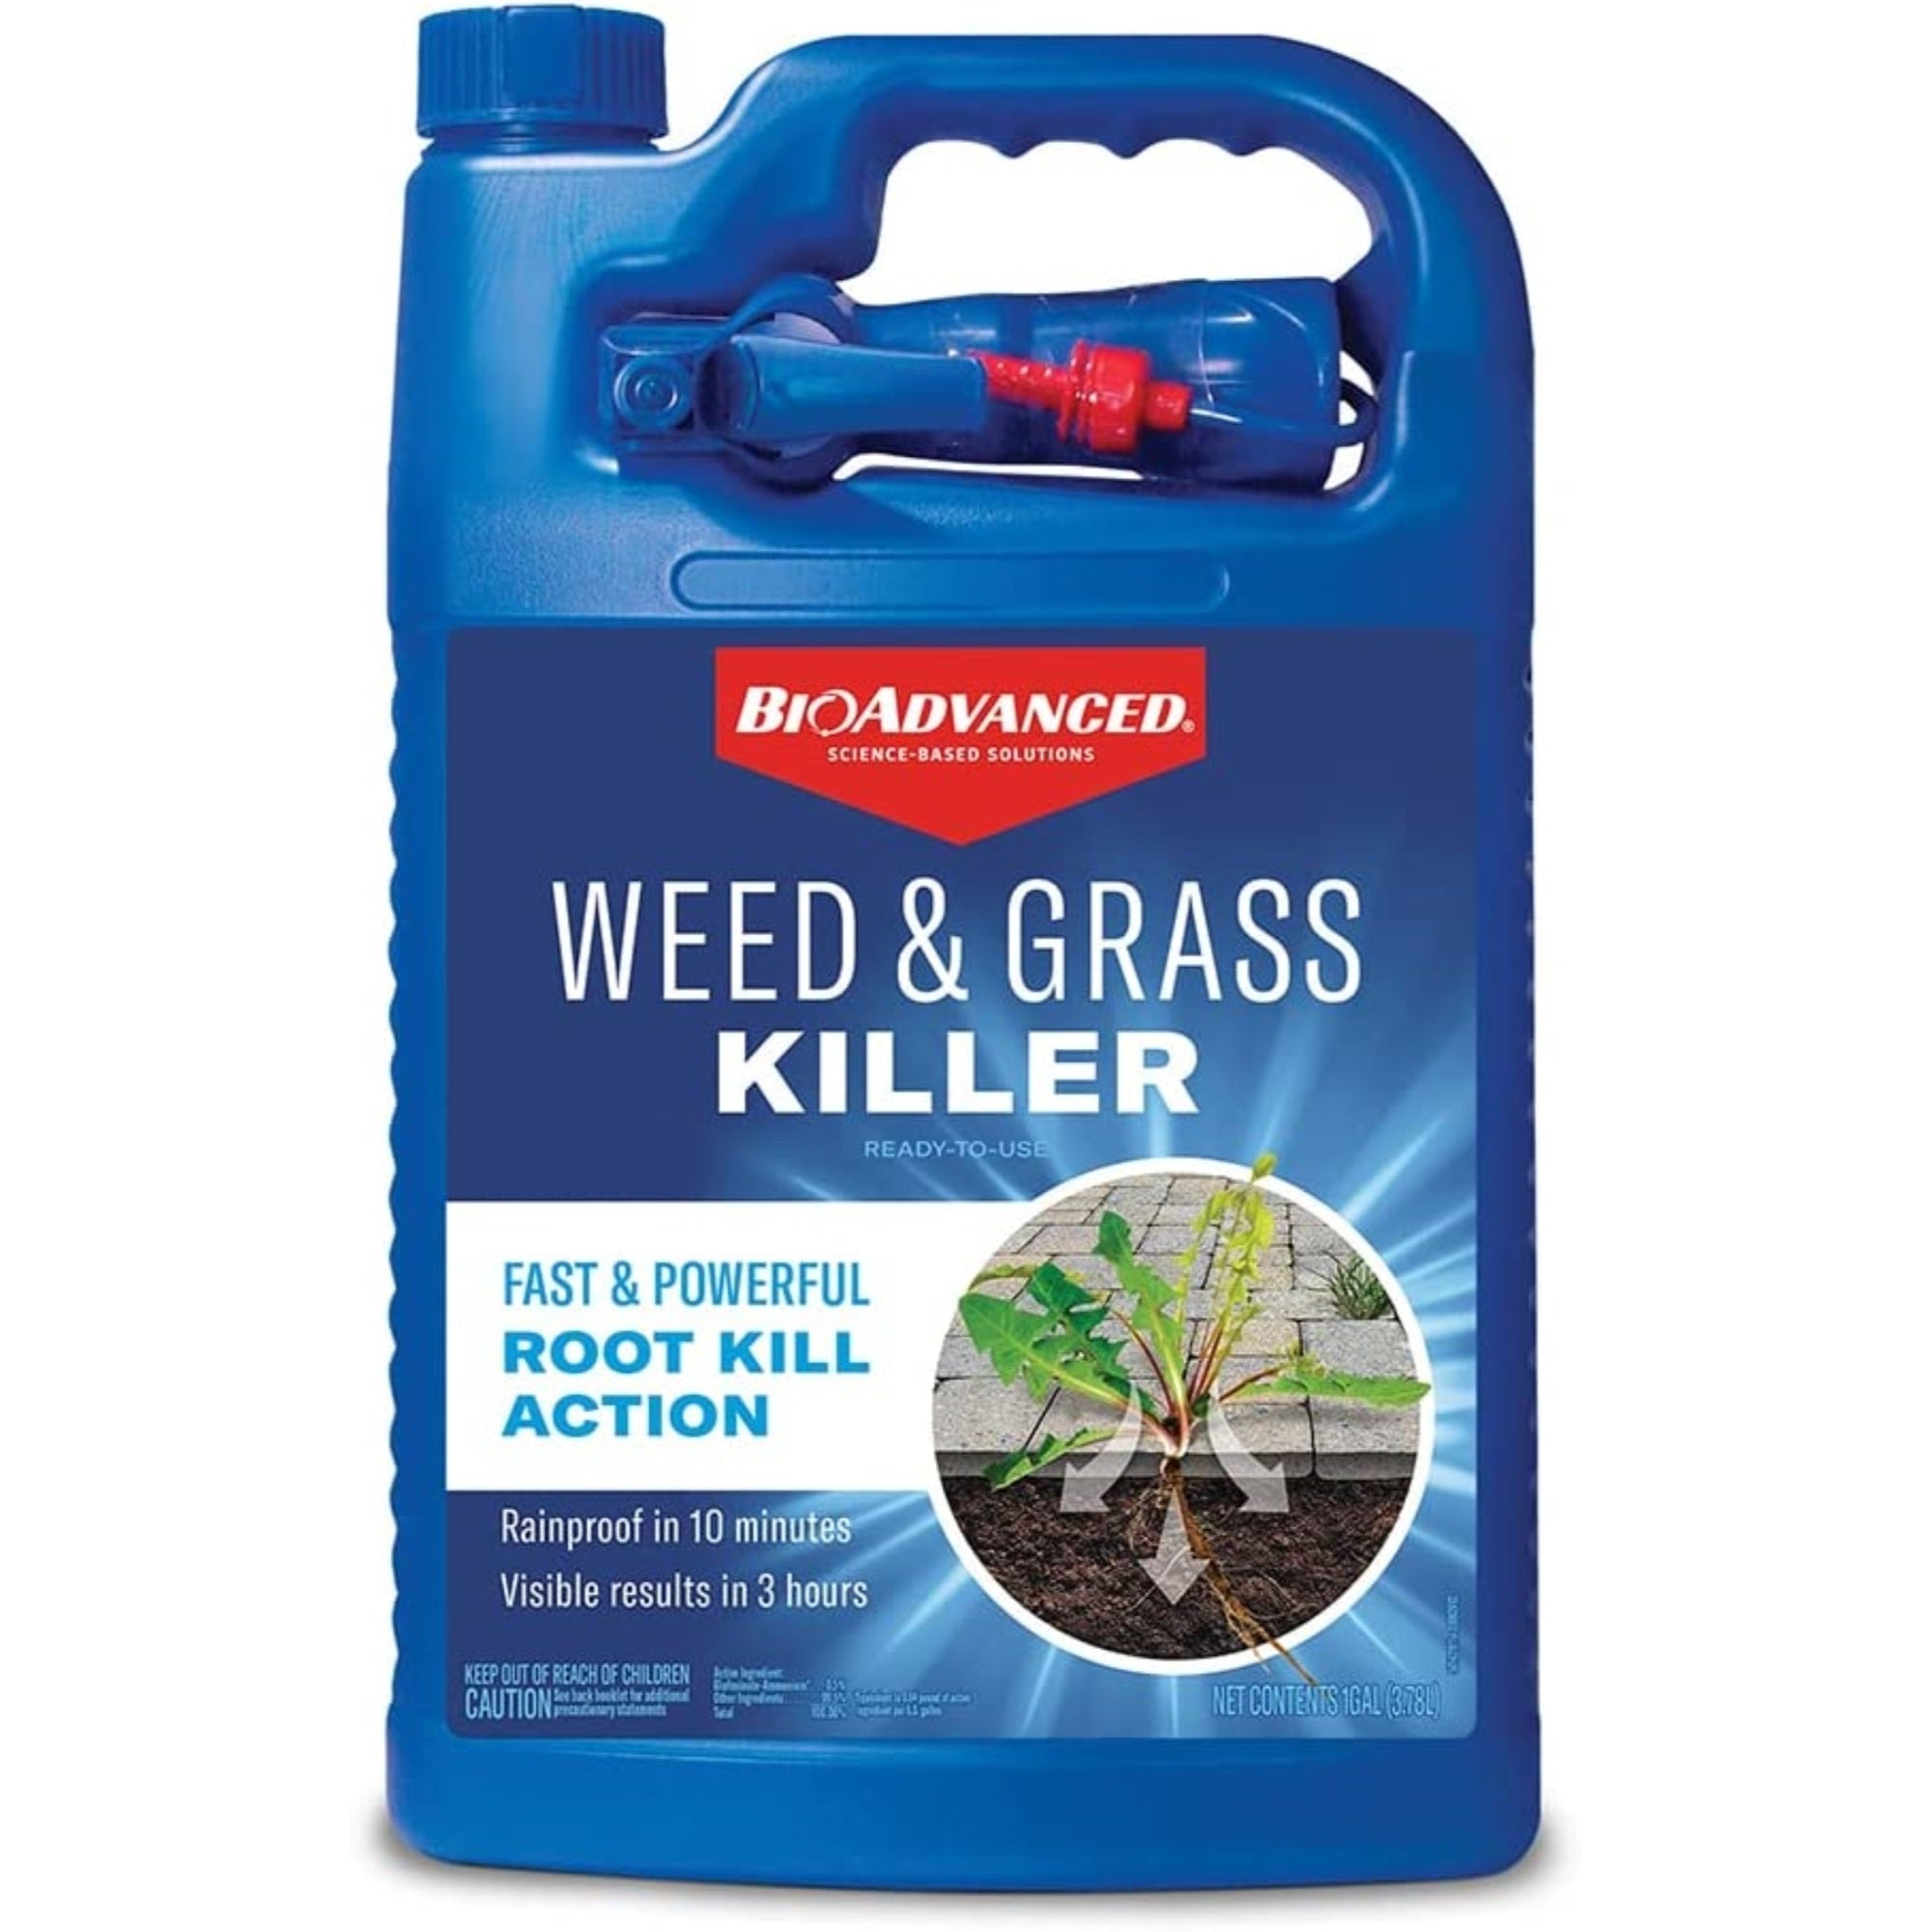 BioAdvanced Weed & Grass Killer, Ready-to-Use 1-Gallon